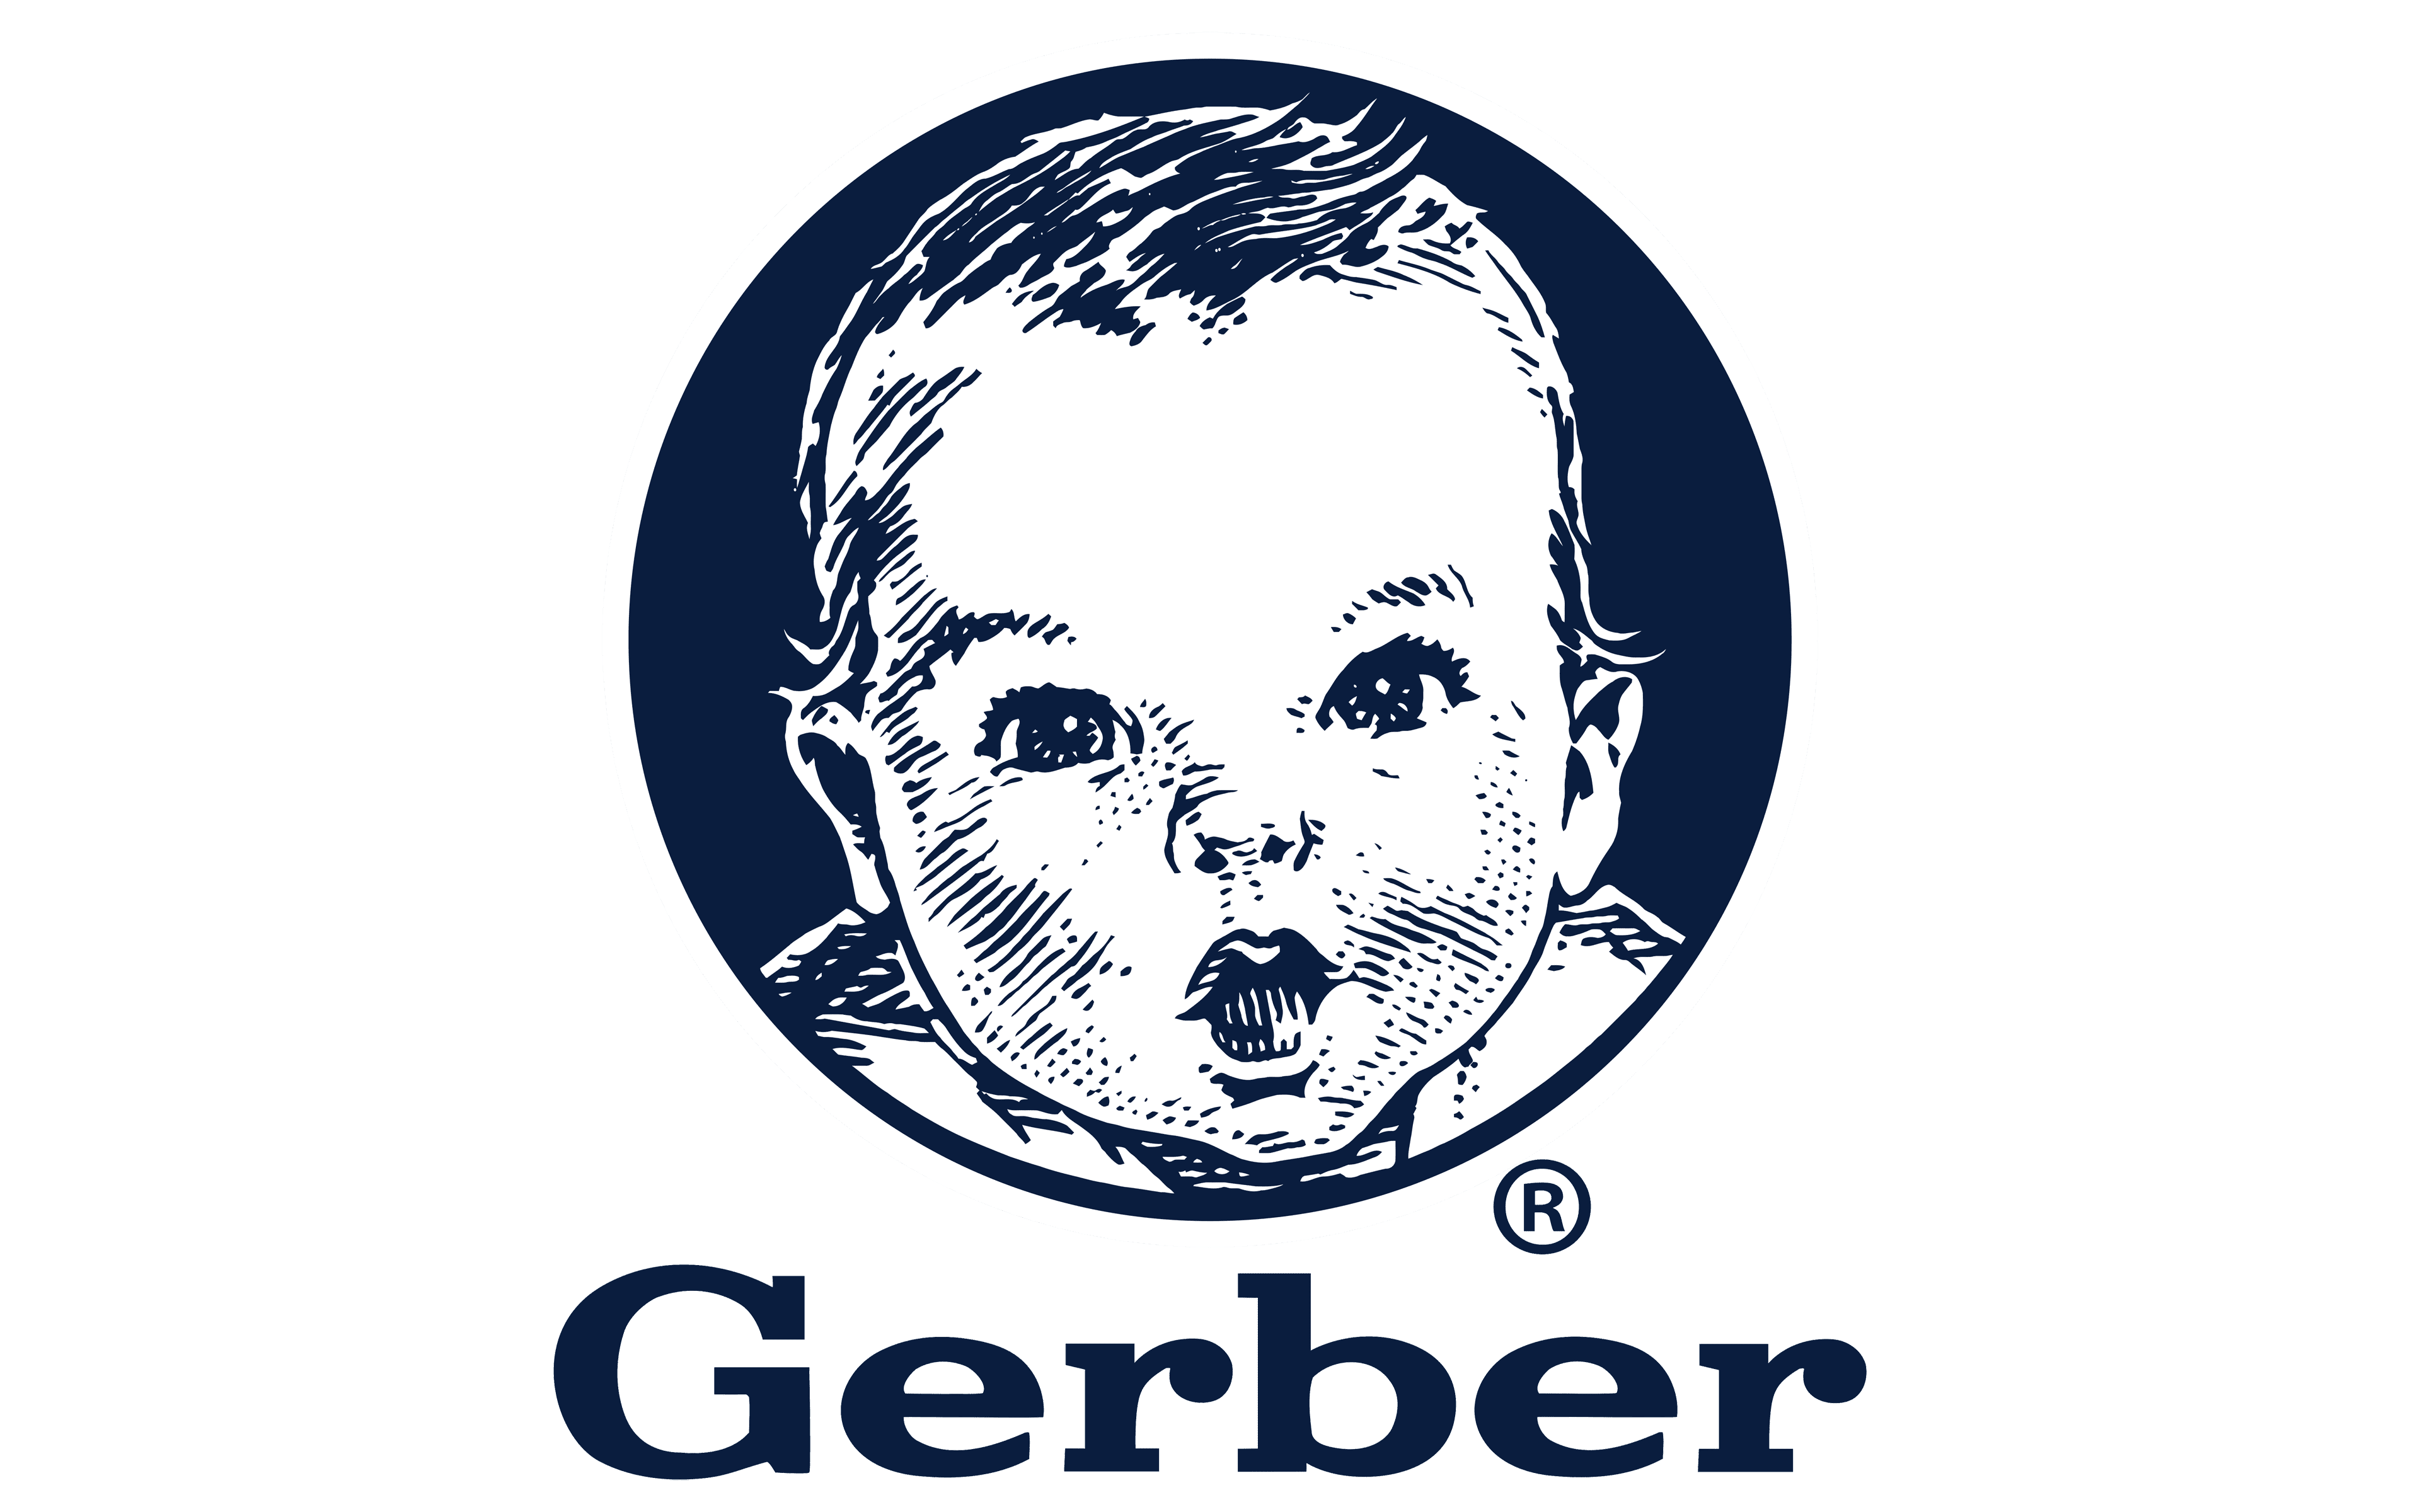 Gerber Baby Online Store - Your One-Stop Shop for Quality Baby Essentials